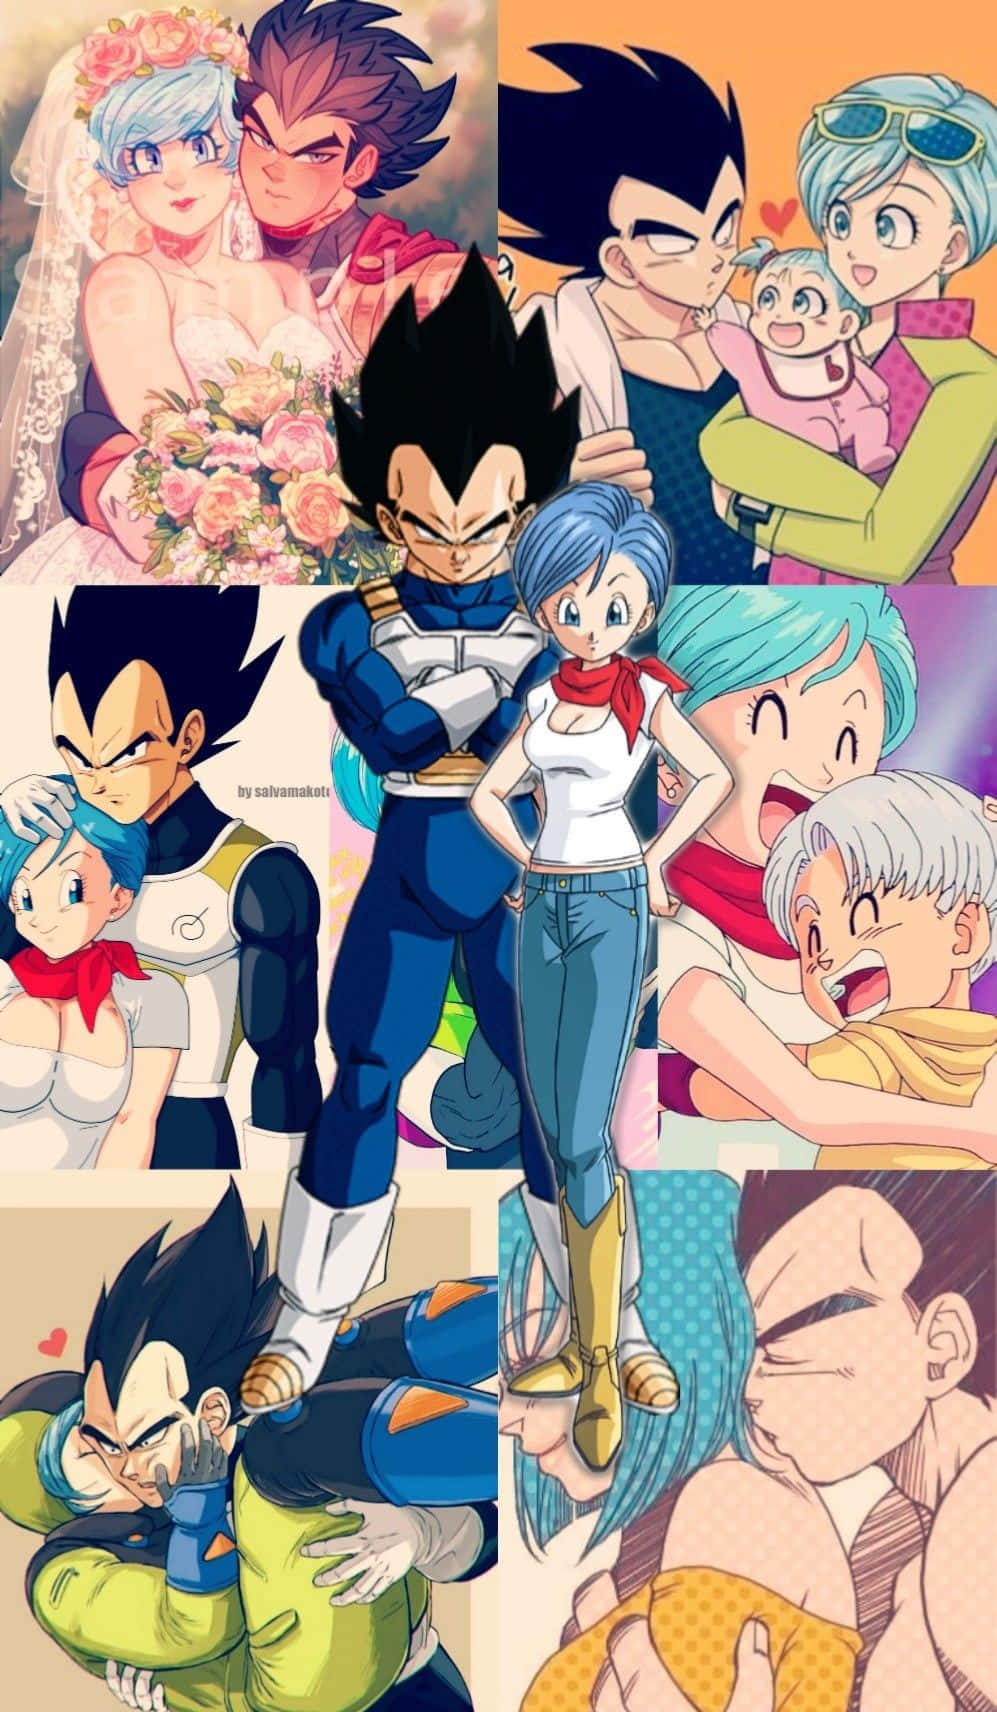 The love between the iconic couple Vegeta and Bulma shines bright. Wallpaper